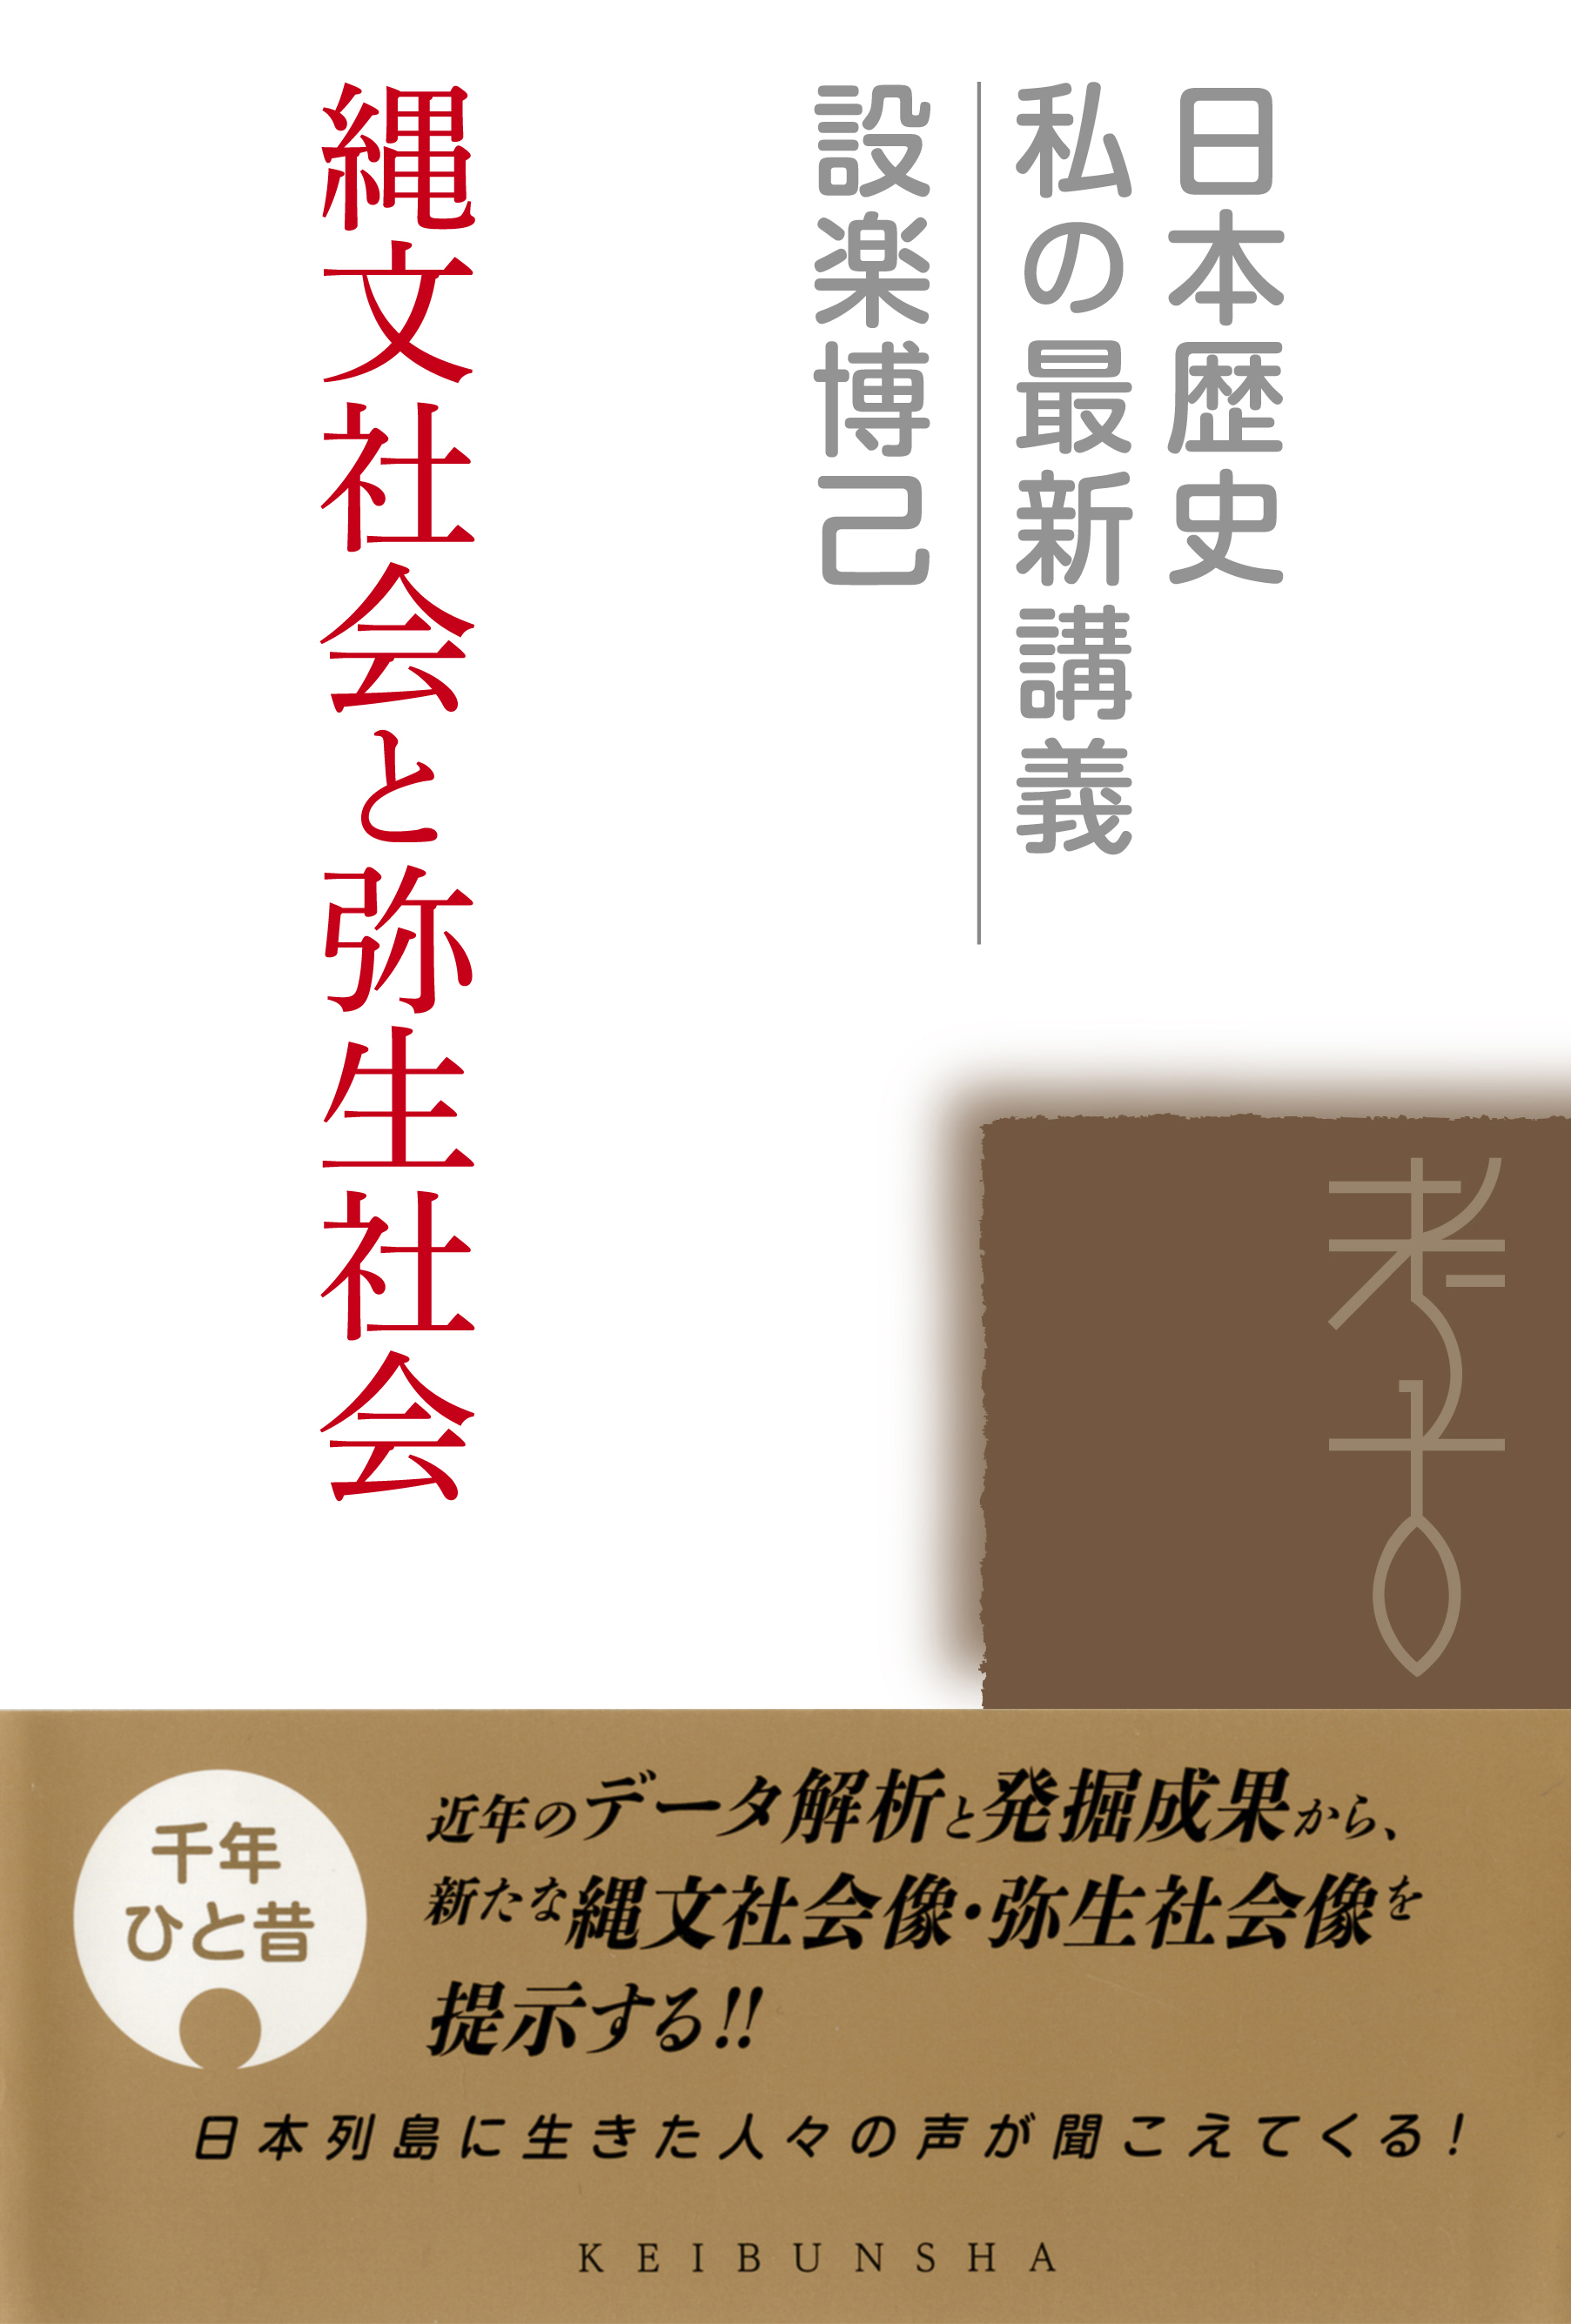 Book title in red on white cover with brown belt